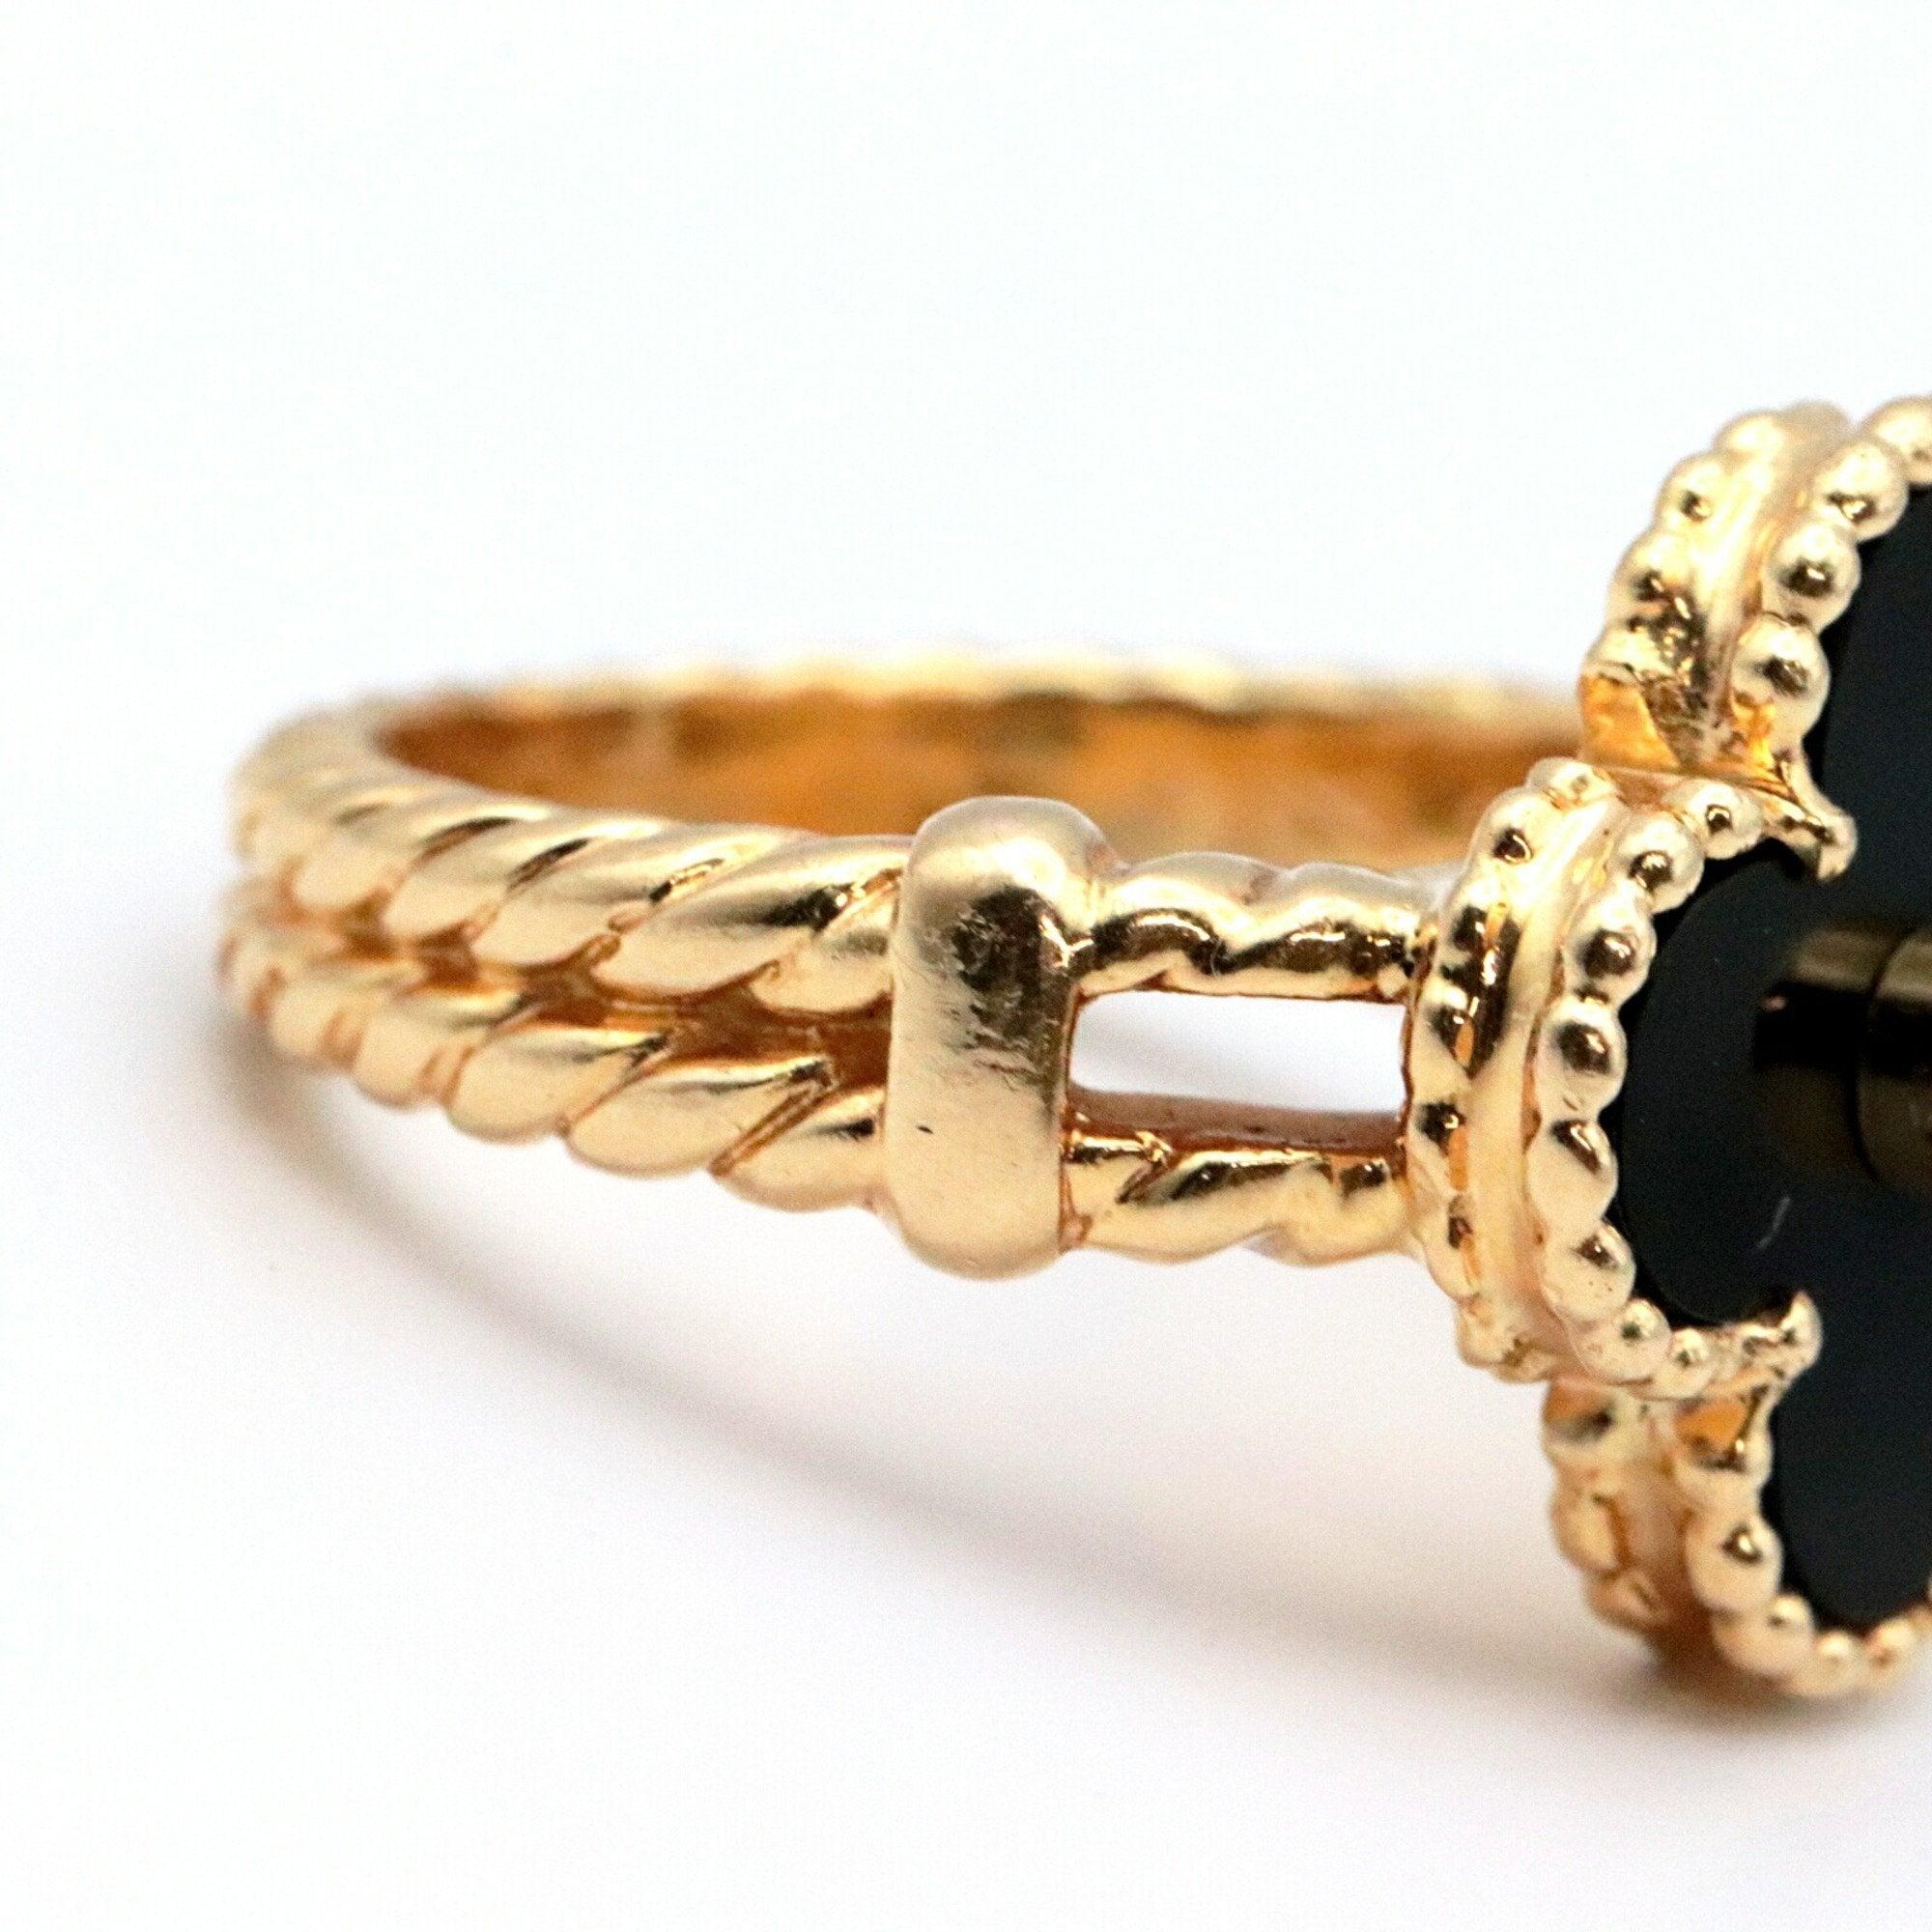 Van Cleef & Arpels Vintage Alhambra Diamond Ring in 18K Yellow Gold In Good Condition For Sale In London, GB